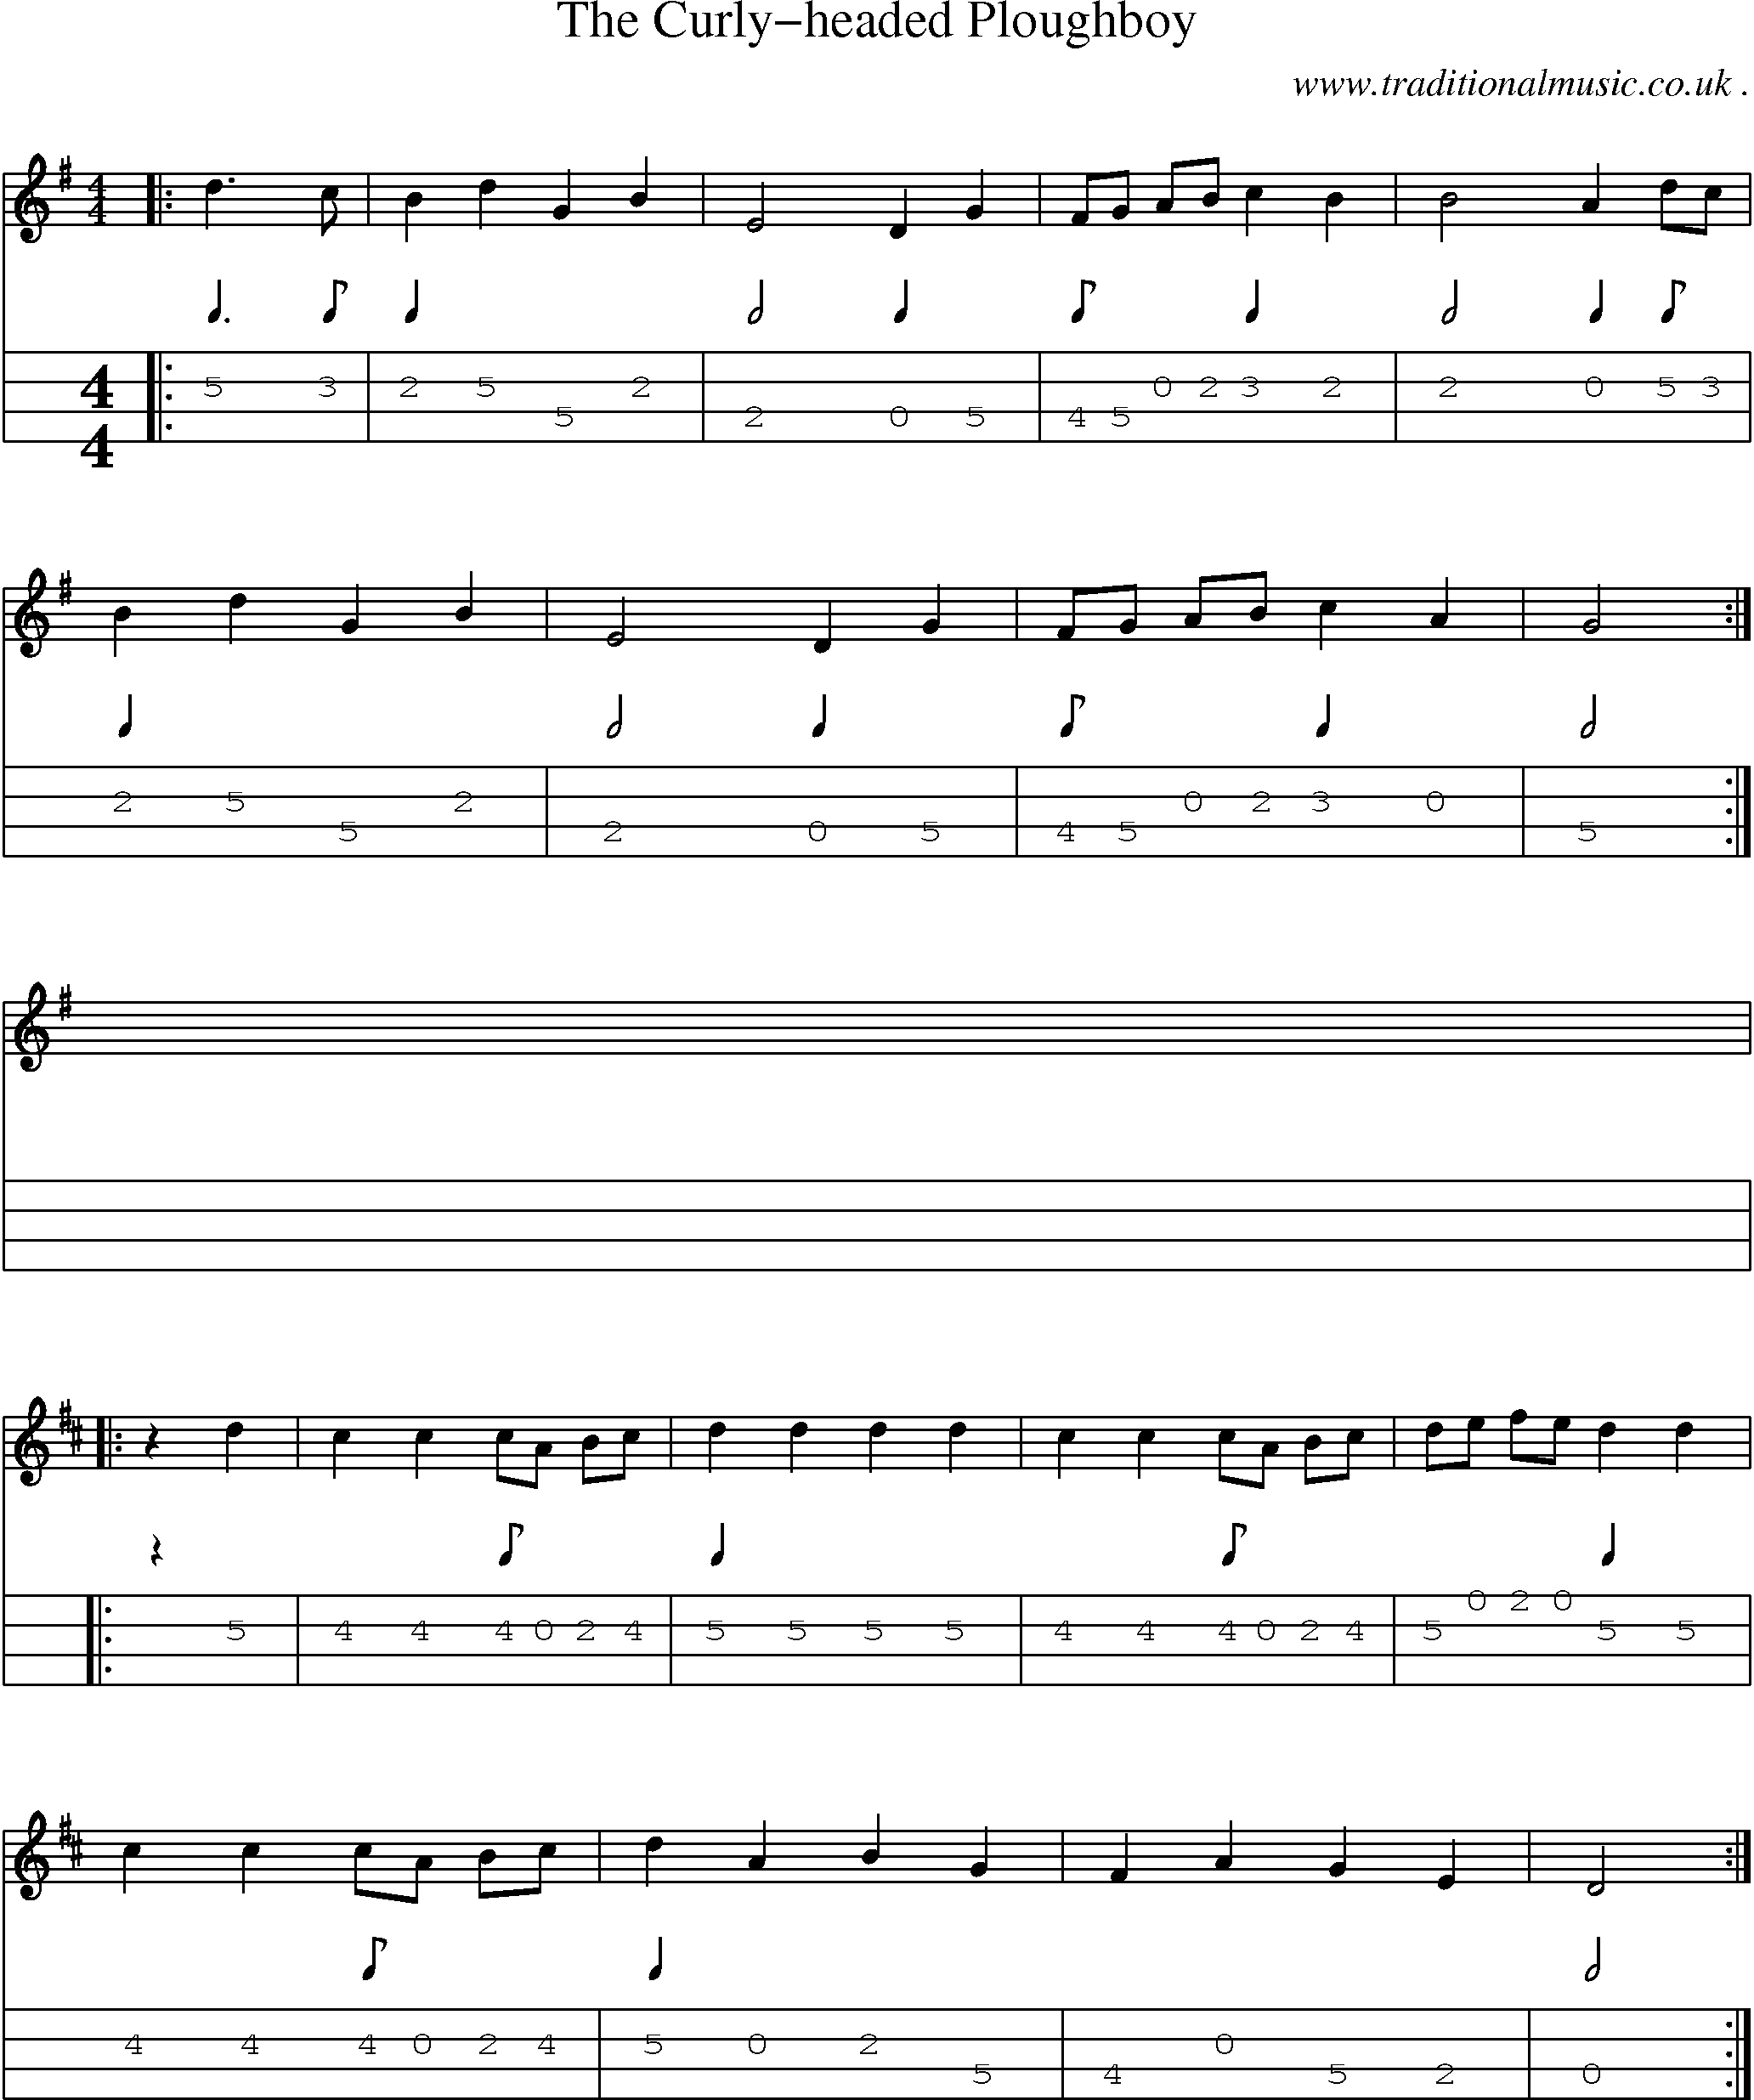 Sheet-Music and Mandolin Tabs for The Curly-headed Ploughboy